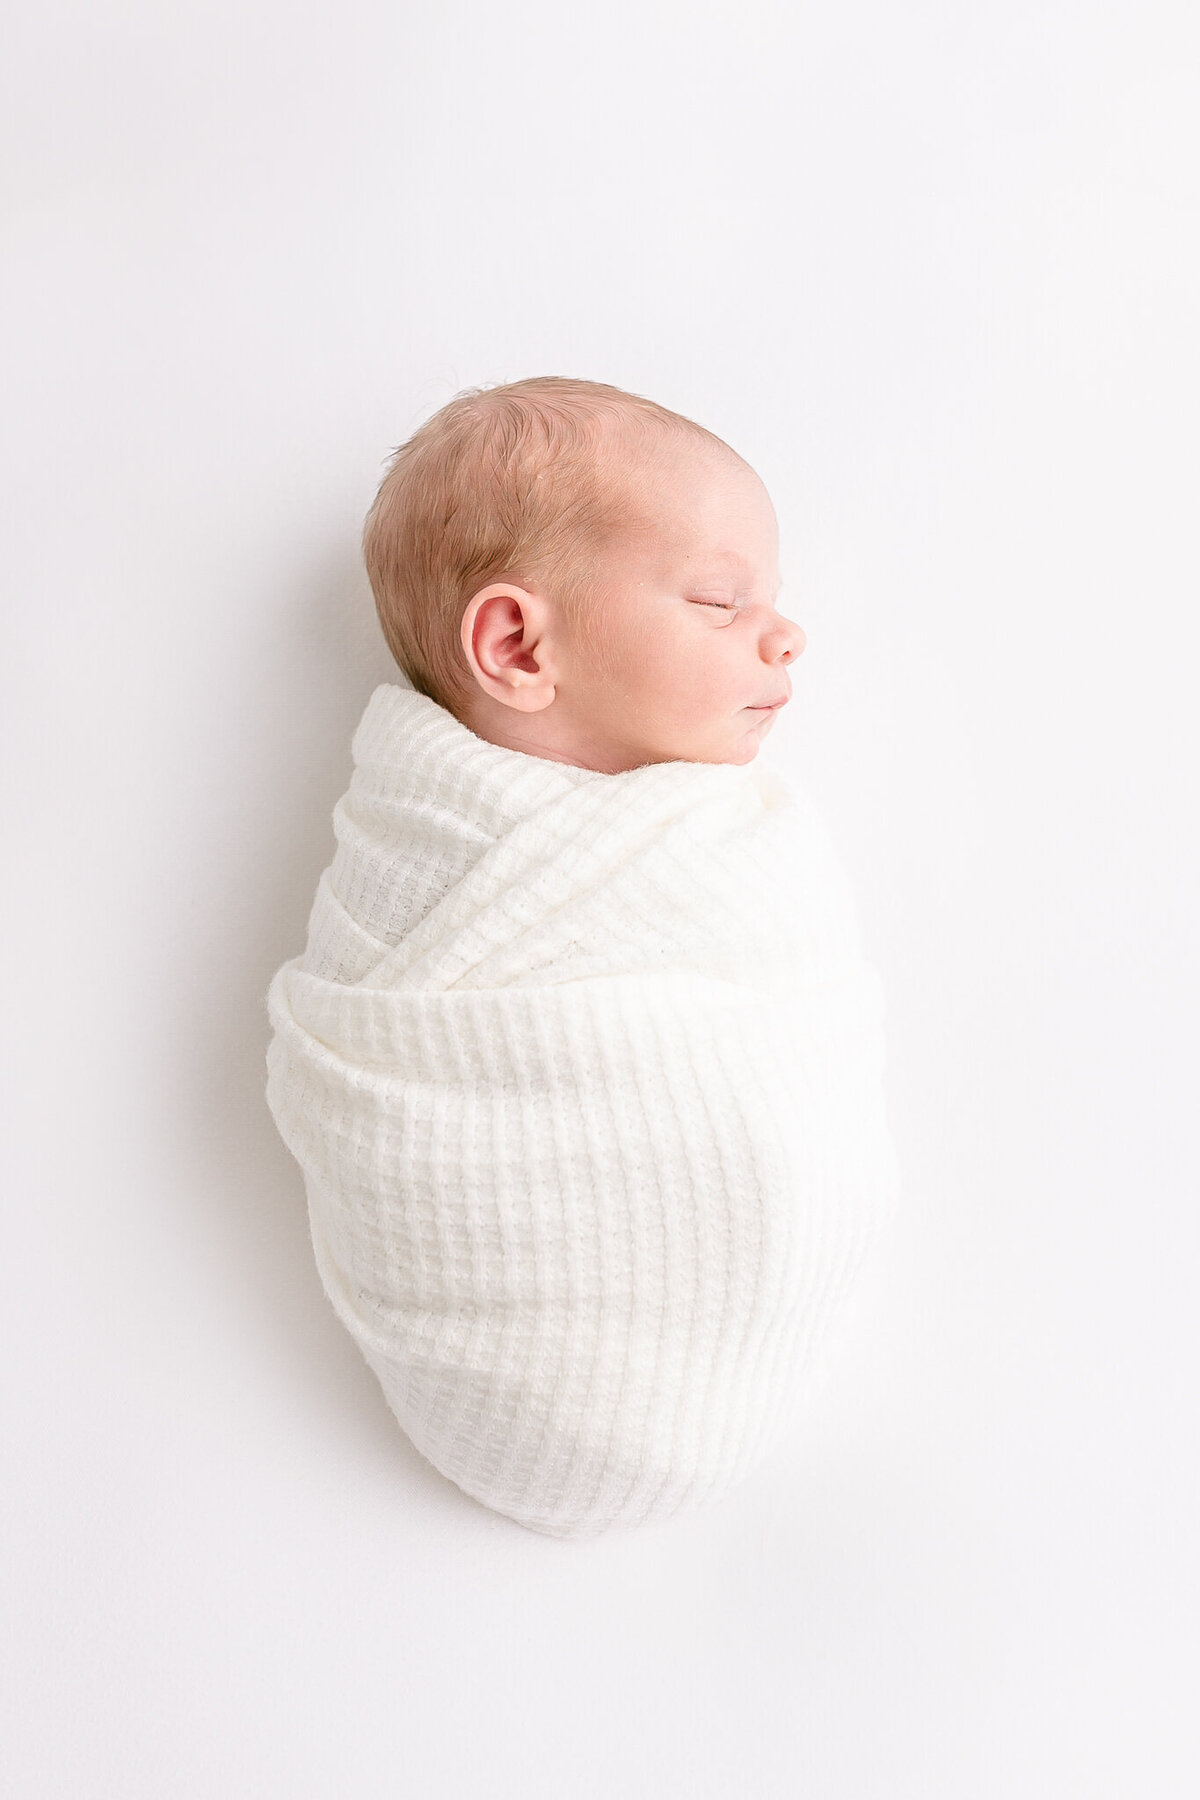 Sleeping baby swaddled in white laying on white backdrop. All swaddled and sleeping peacefully on back with head turned to one side. Image taken during PDX newborn photography session.